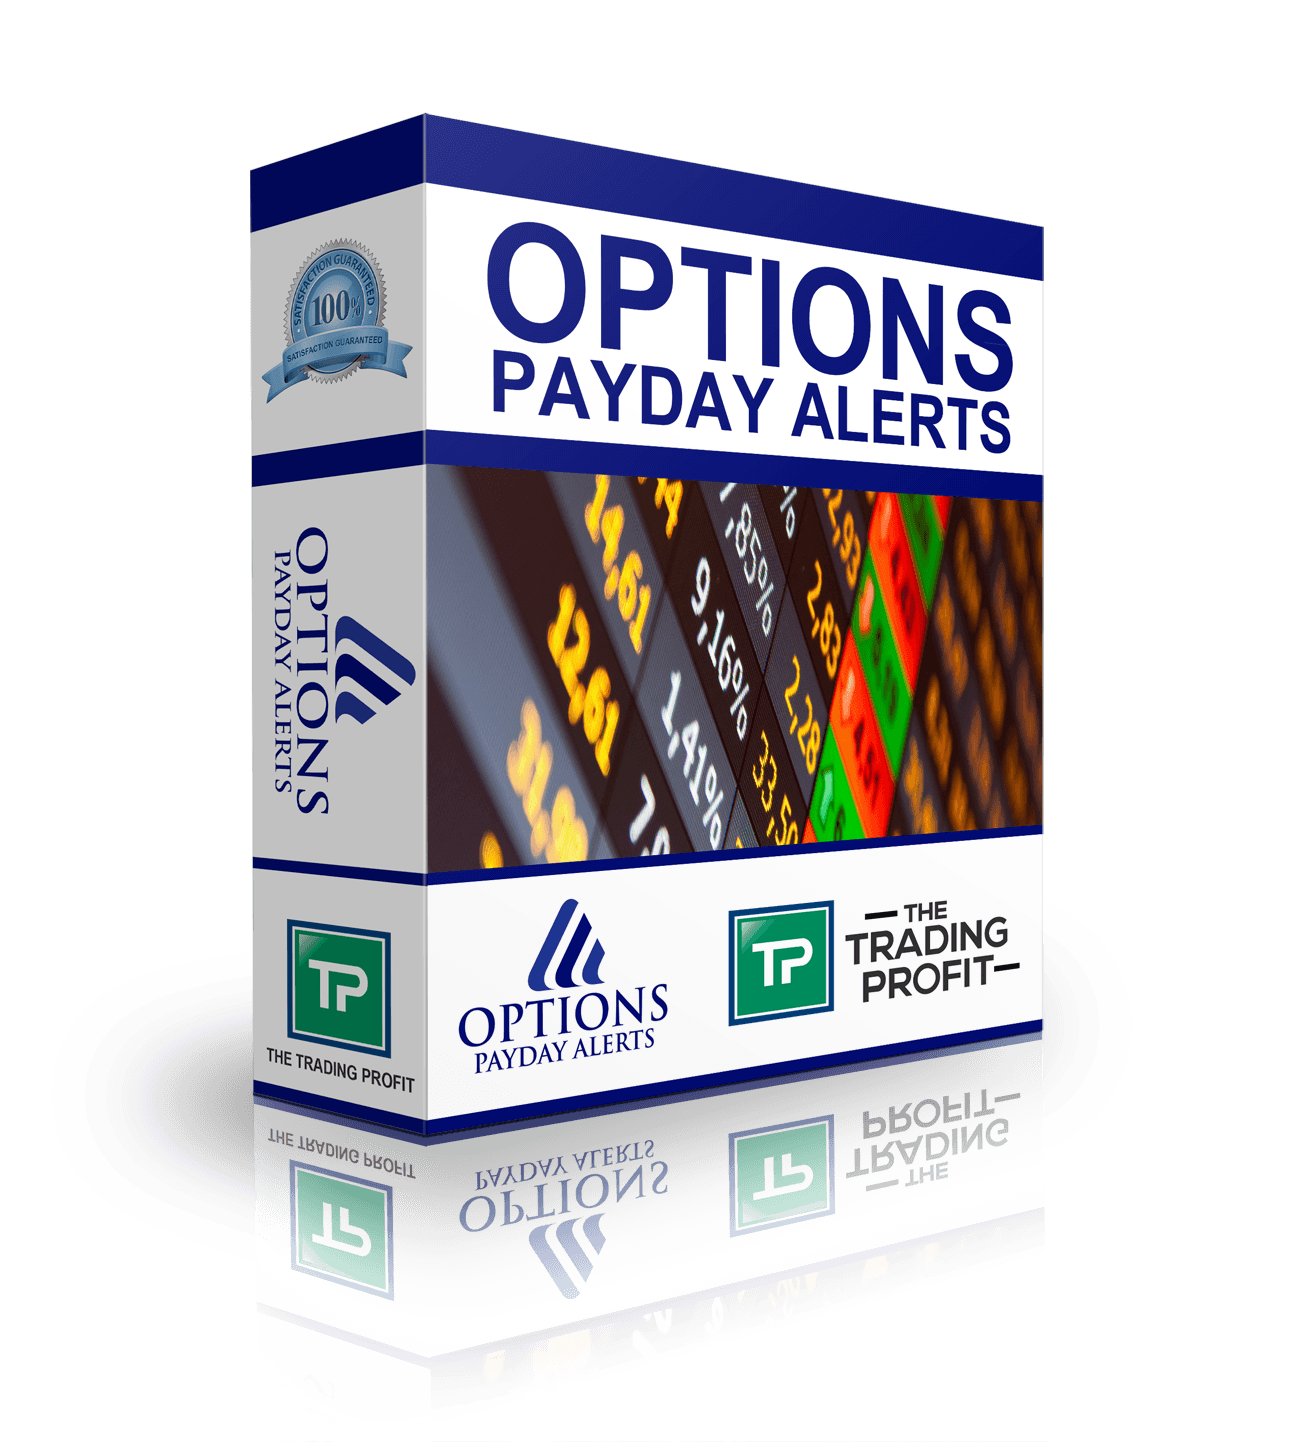 Options payday alert